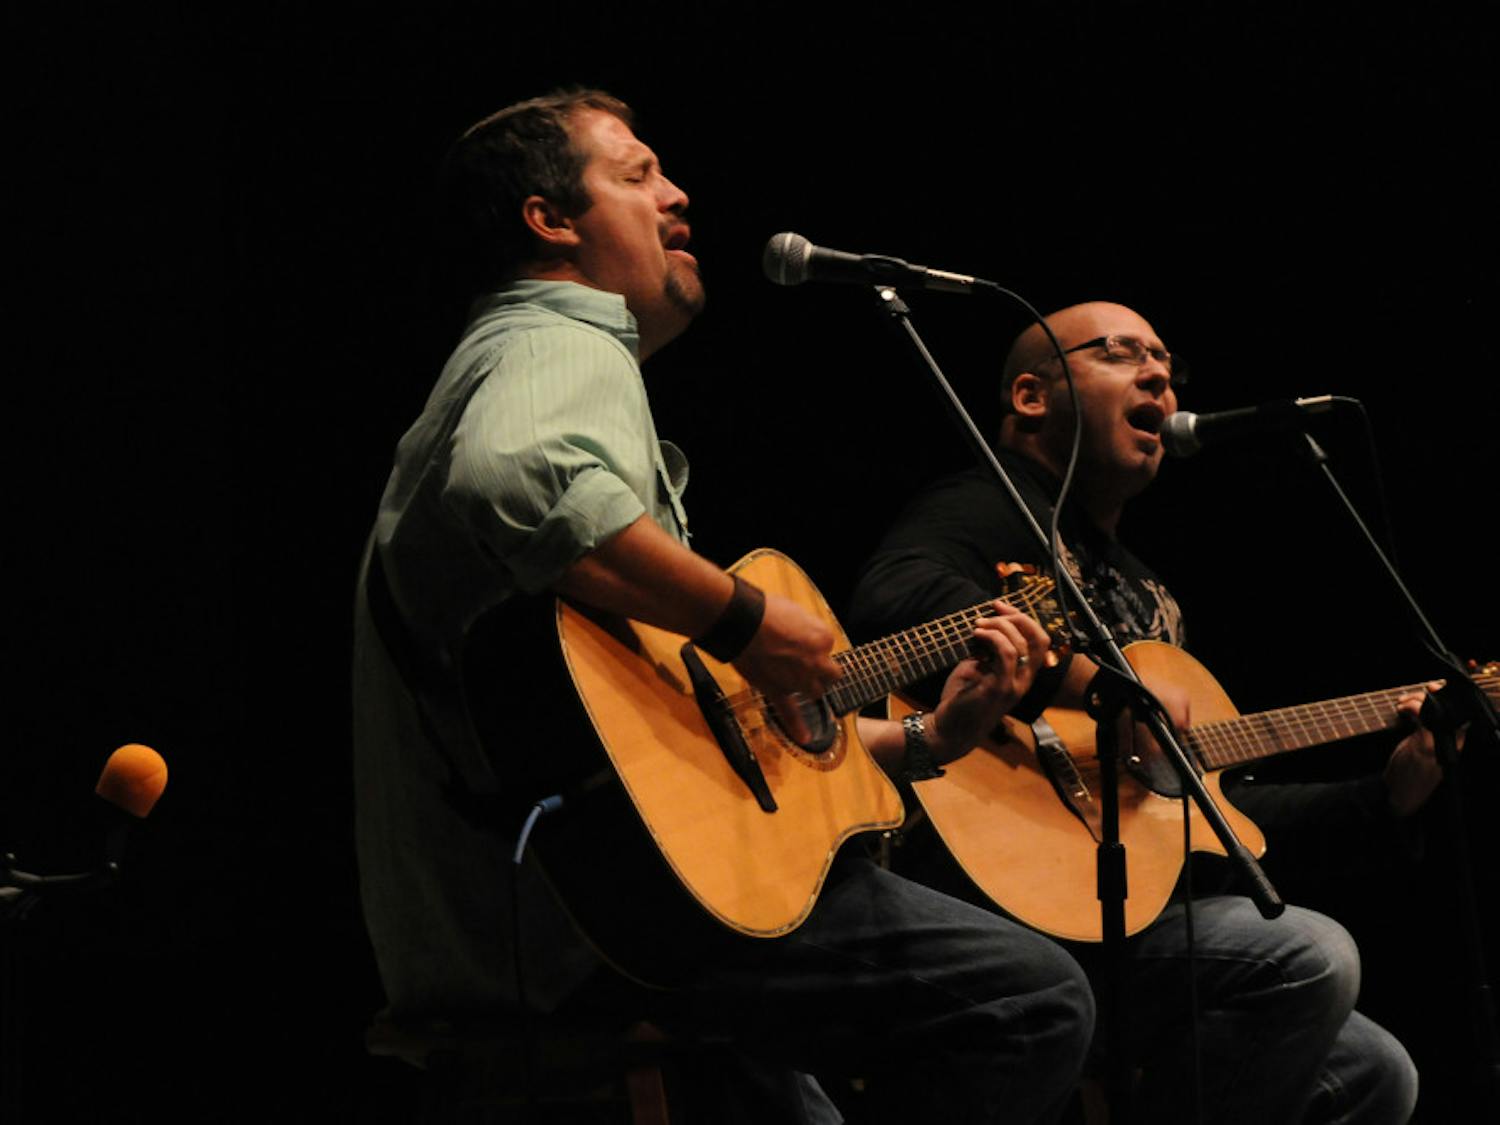 Drew Copeland and Ken Block of Sister Hazel perform Thursday night at a benefit for Shands Vista Florida Recovery Center at the Trinity United Methodist Church, 4000 NW 53 St.